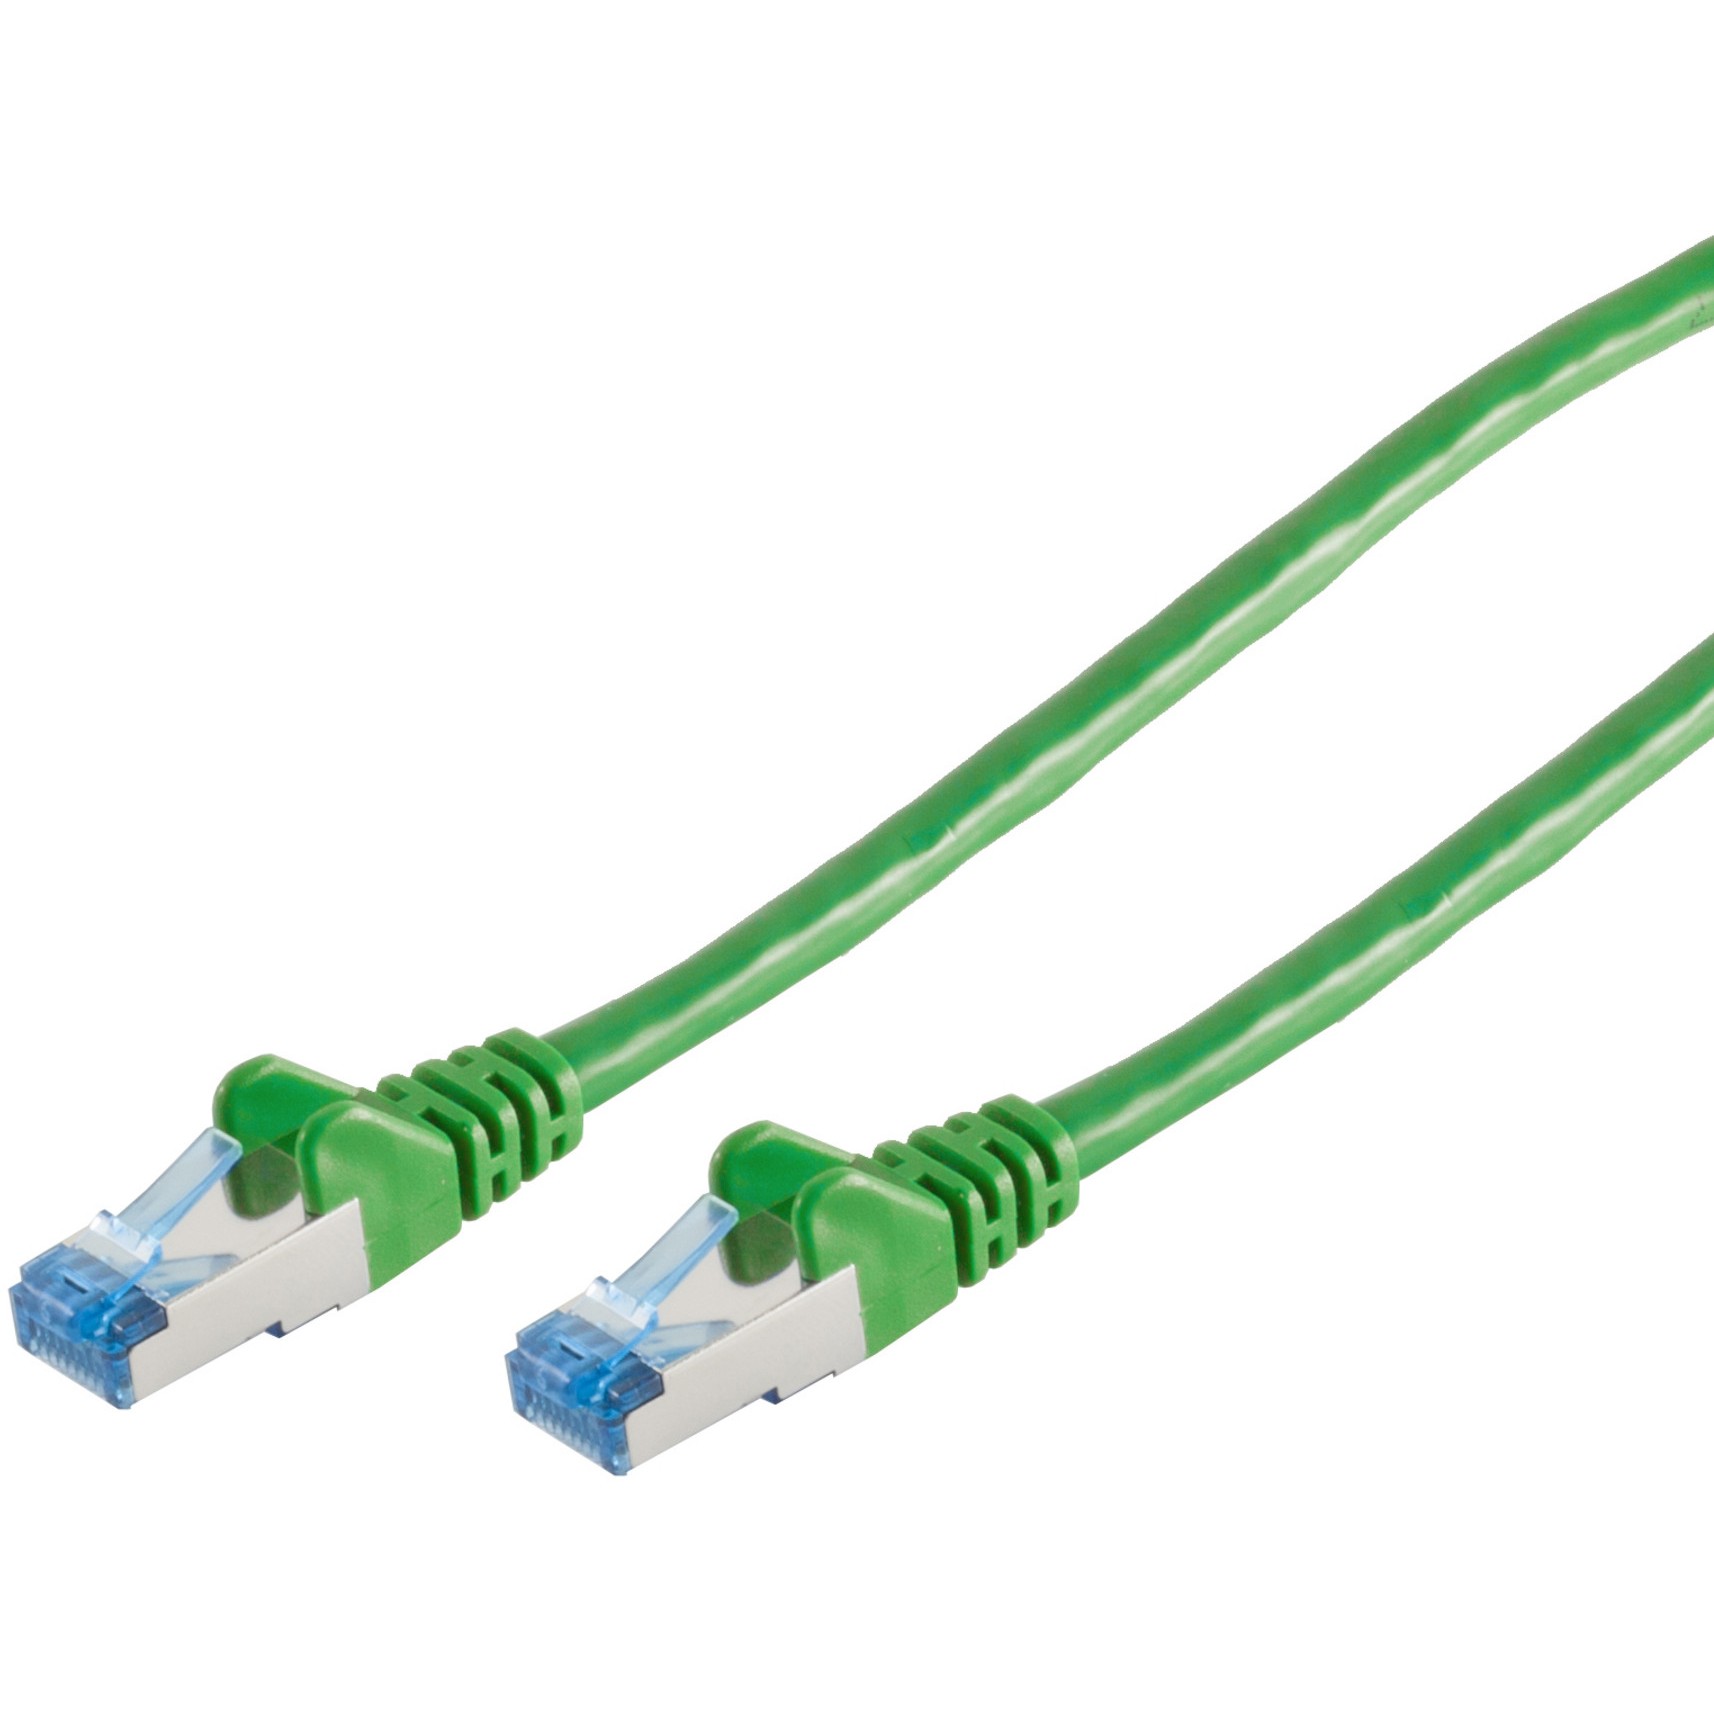 S-Conn 75711-0.25G networking cable